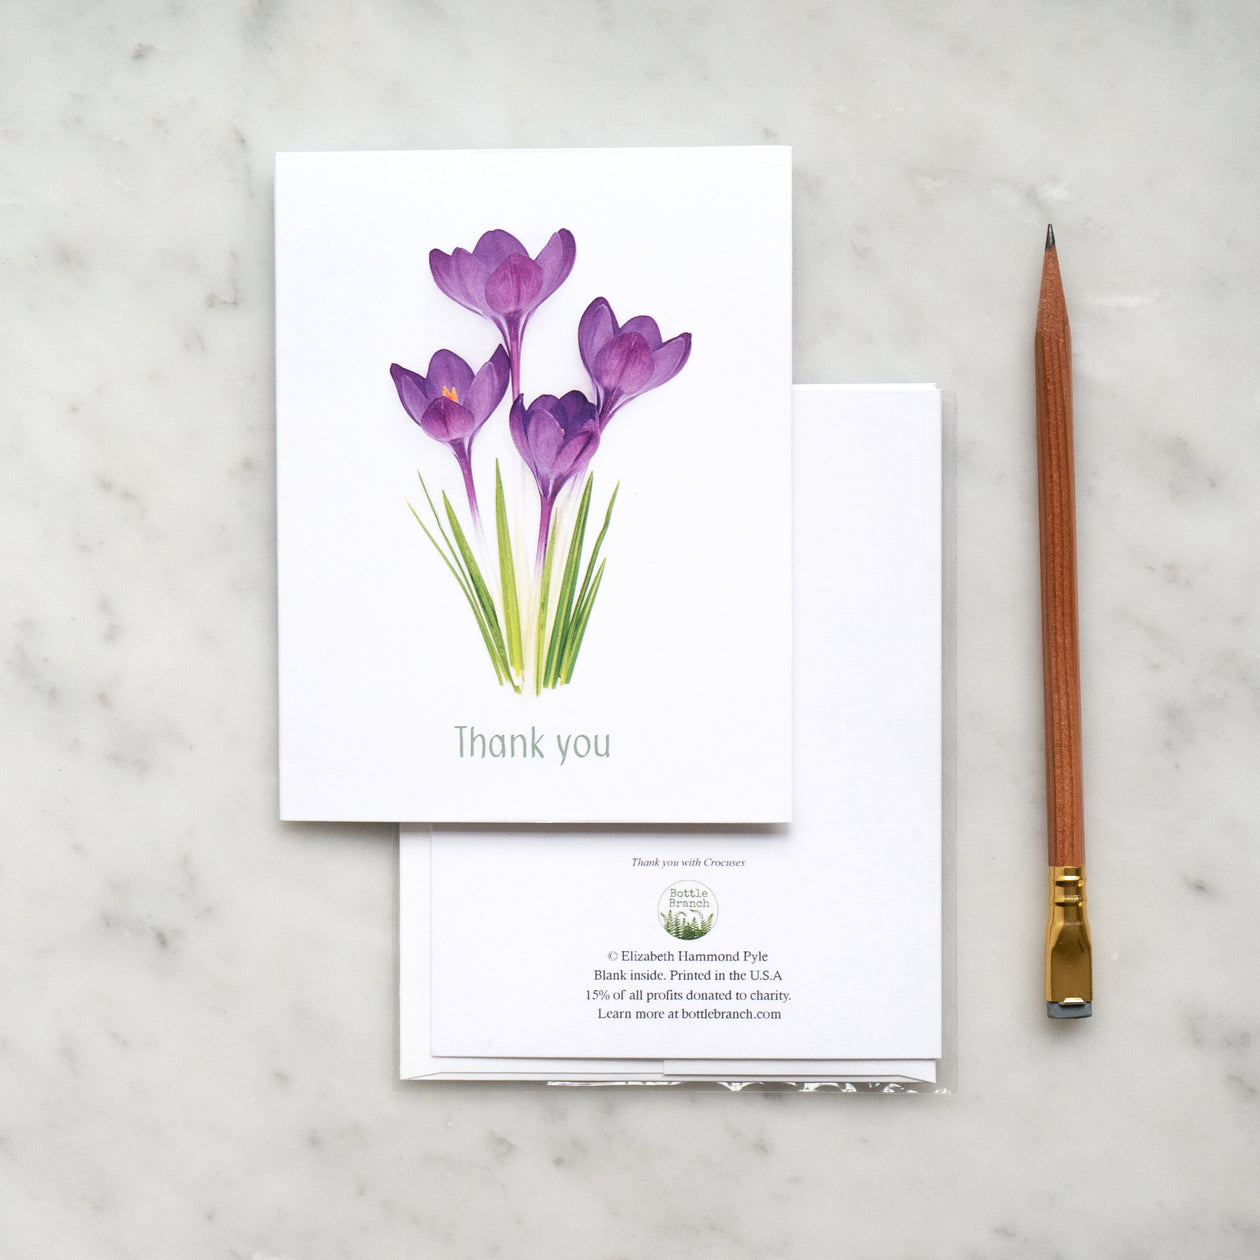 Thank you card with crocus flowers